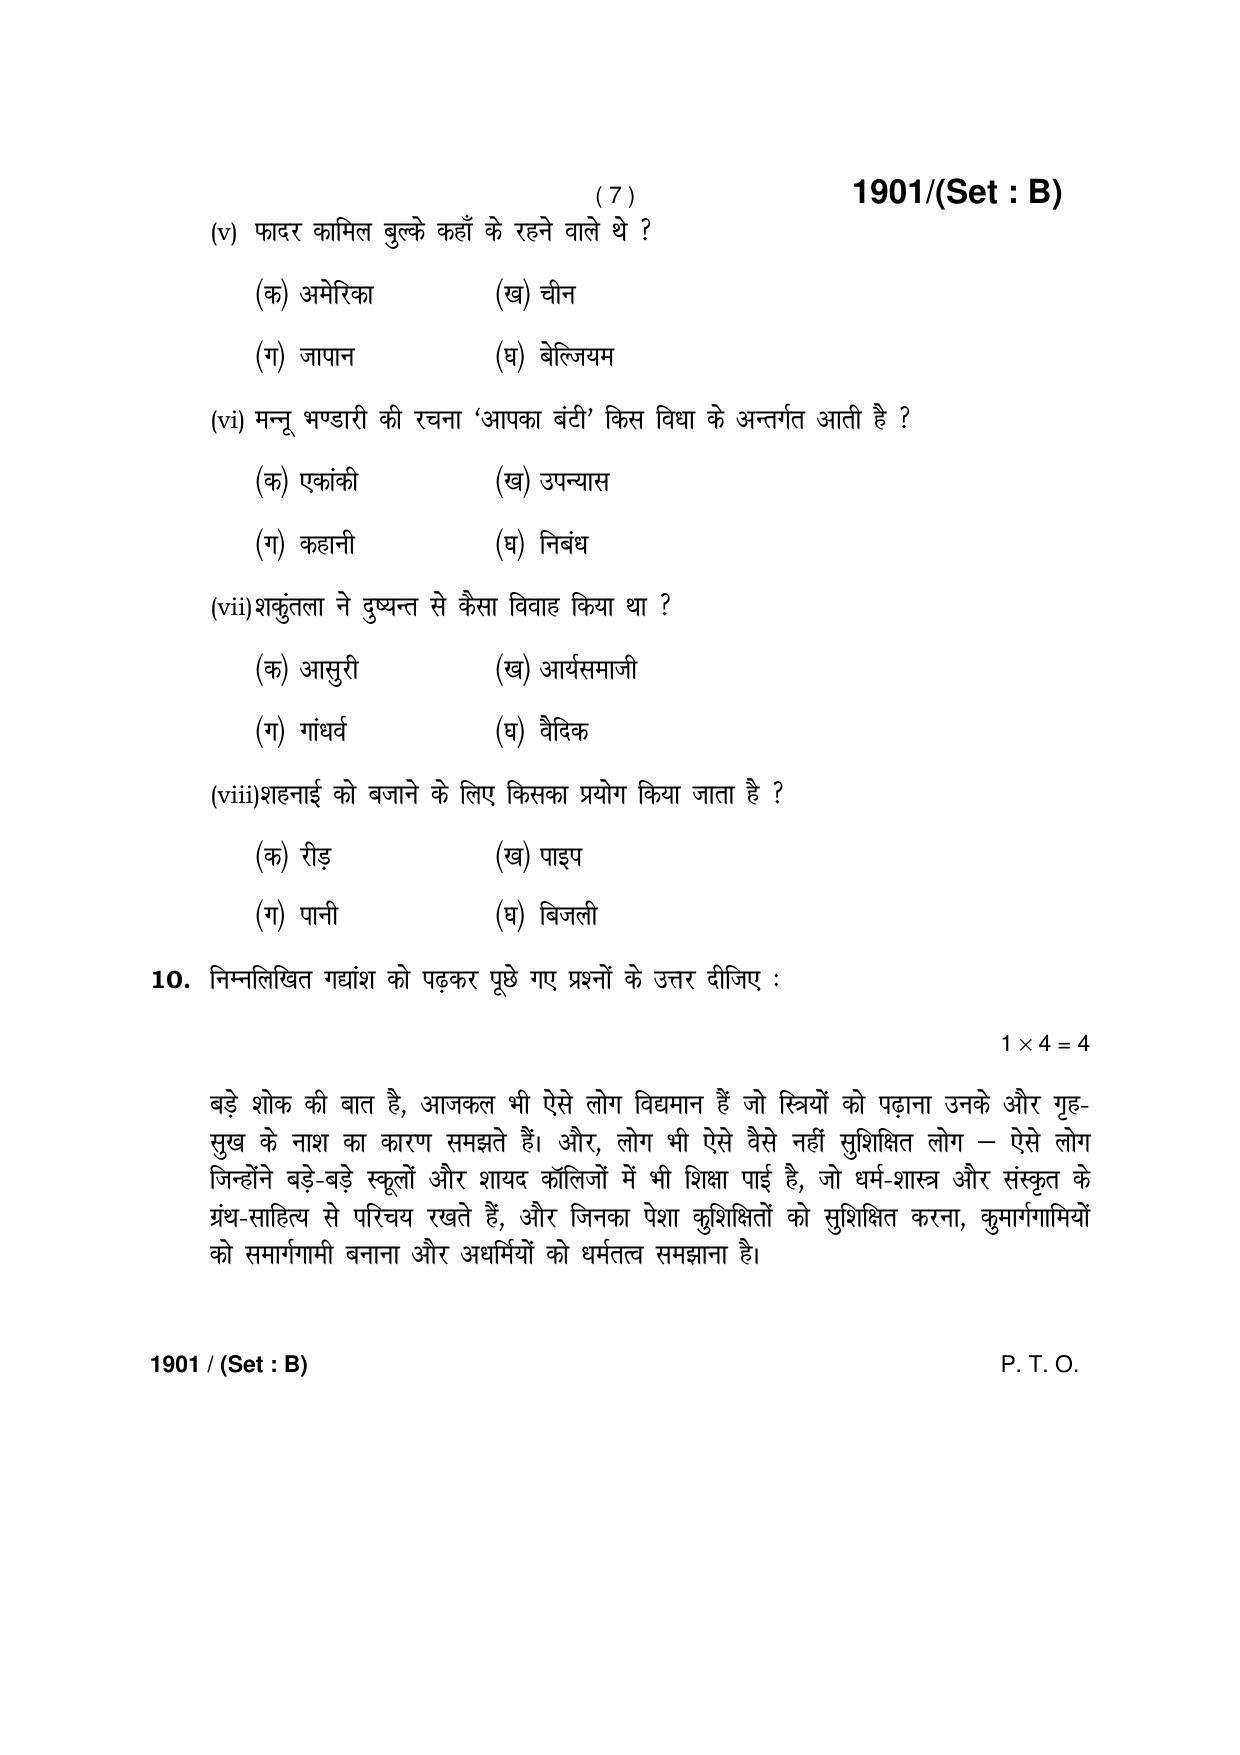 Haryana Board HBSE Class 10 Hindi -B 2017 Question Paper - Page 7